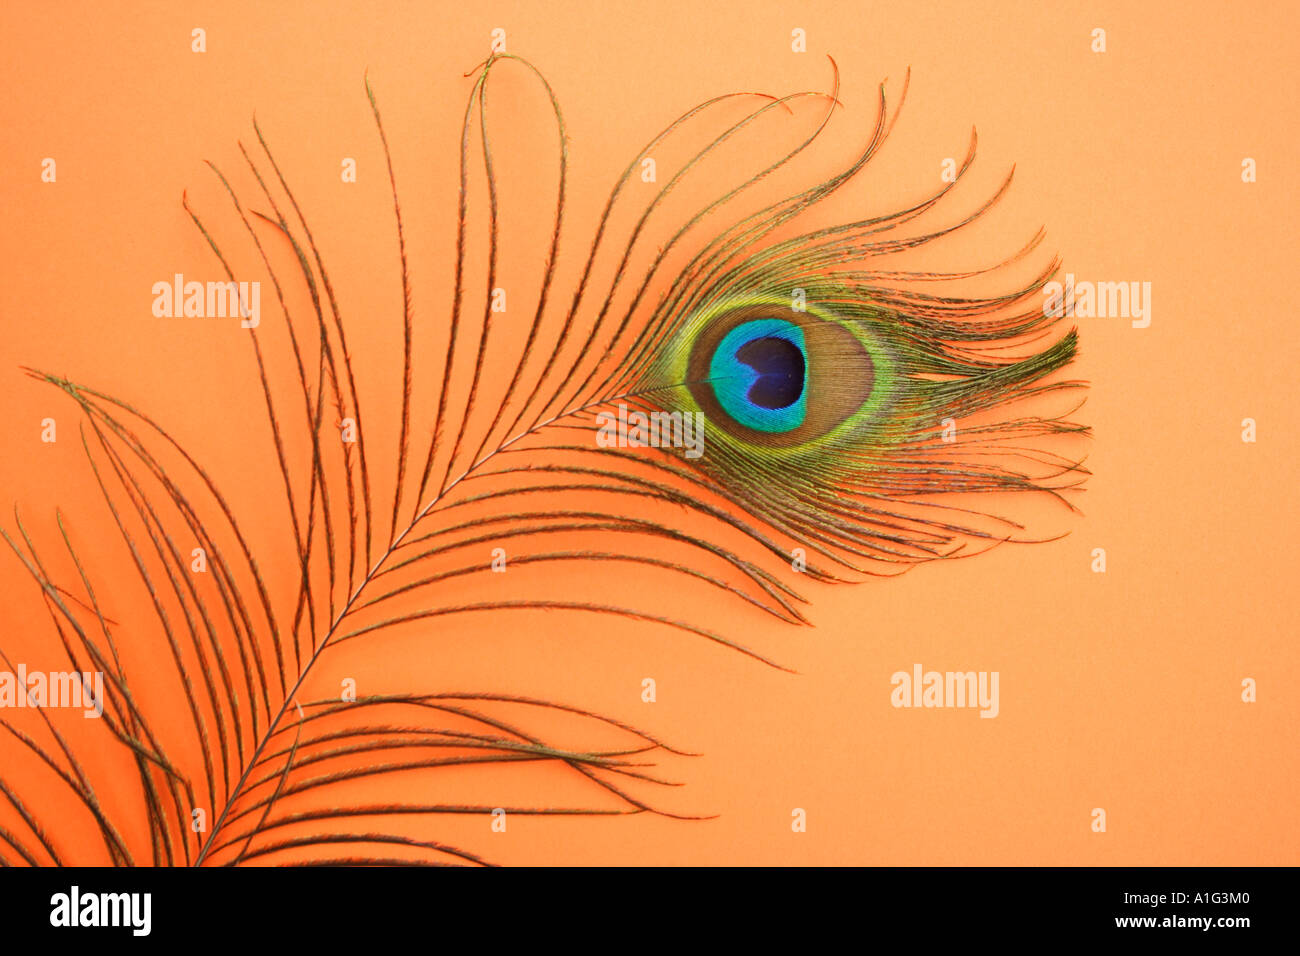 CLOSE UP OF A PEACOCK FEATHER ORANGE BACKGROUND Stock Photo - Alamy